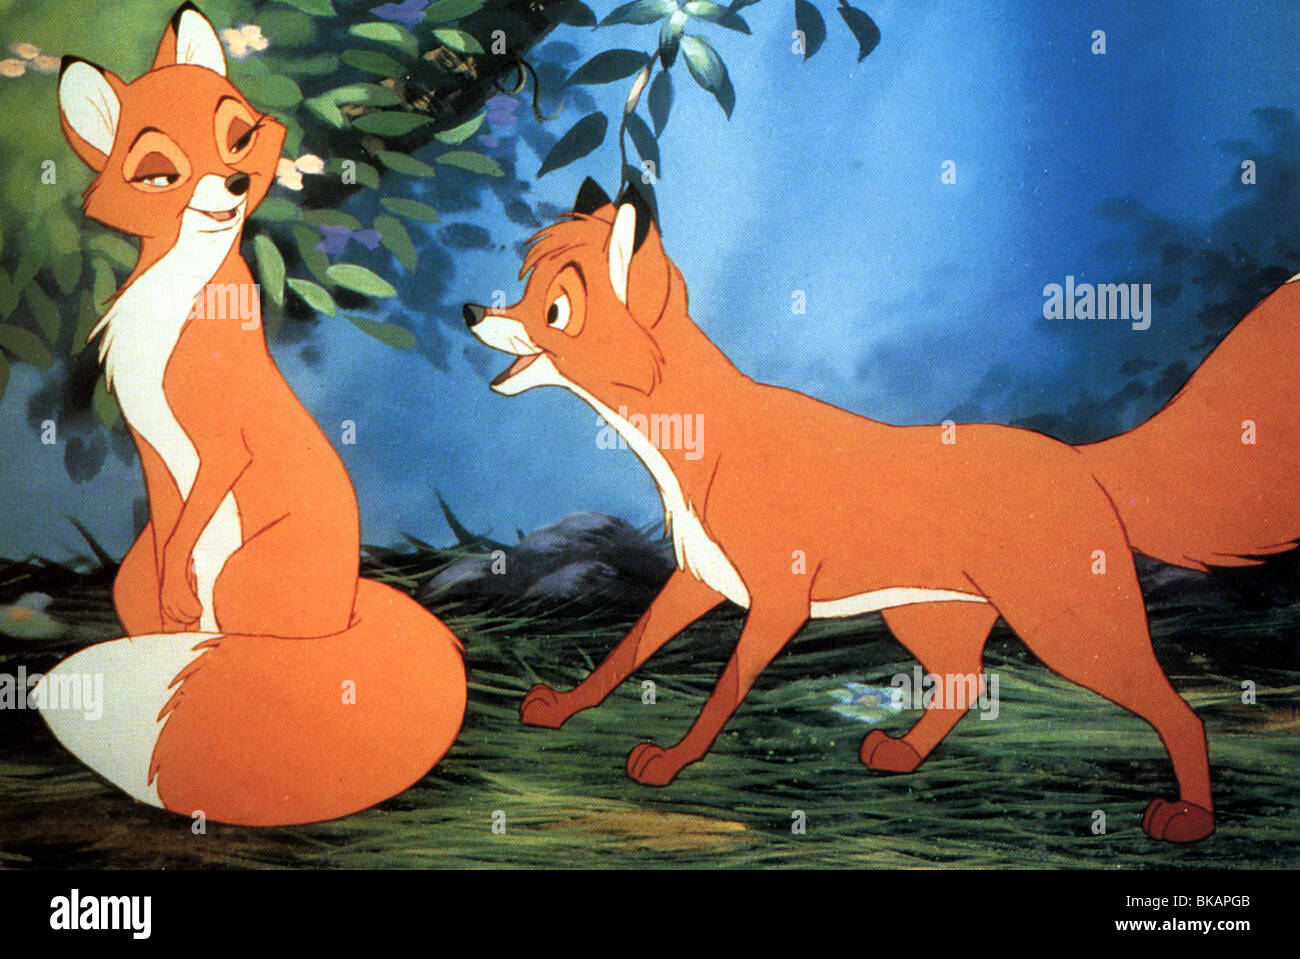 THE FOX AND THE HOUND (ANI - 1981) ANIMATED CREDIT DISNEY FATH 001FOH MOVIESTORE COLLECTION LTD Stock Photo